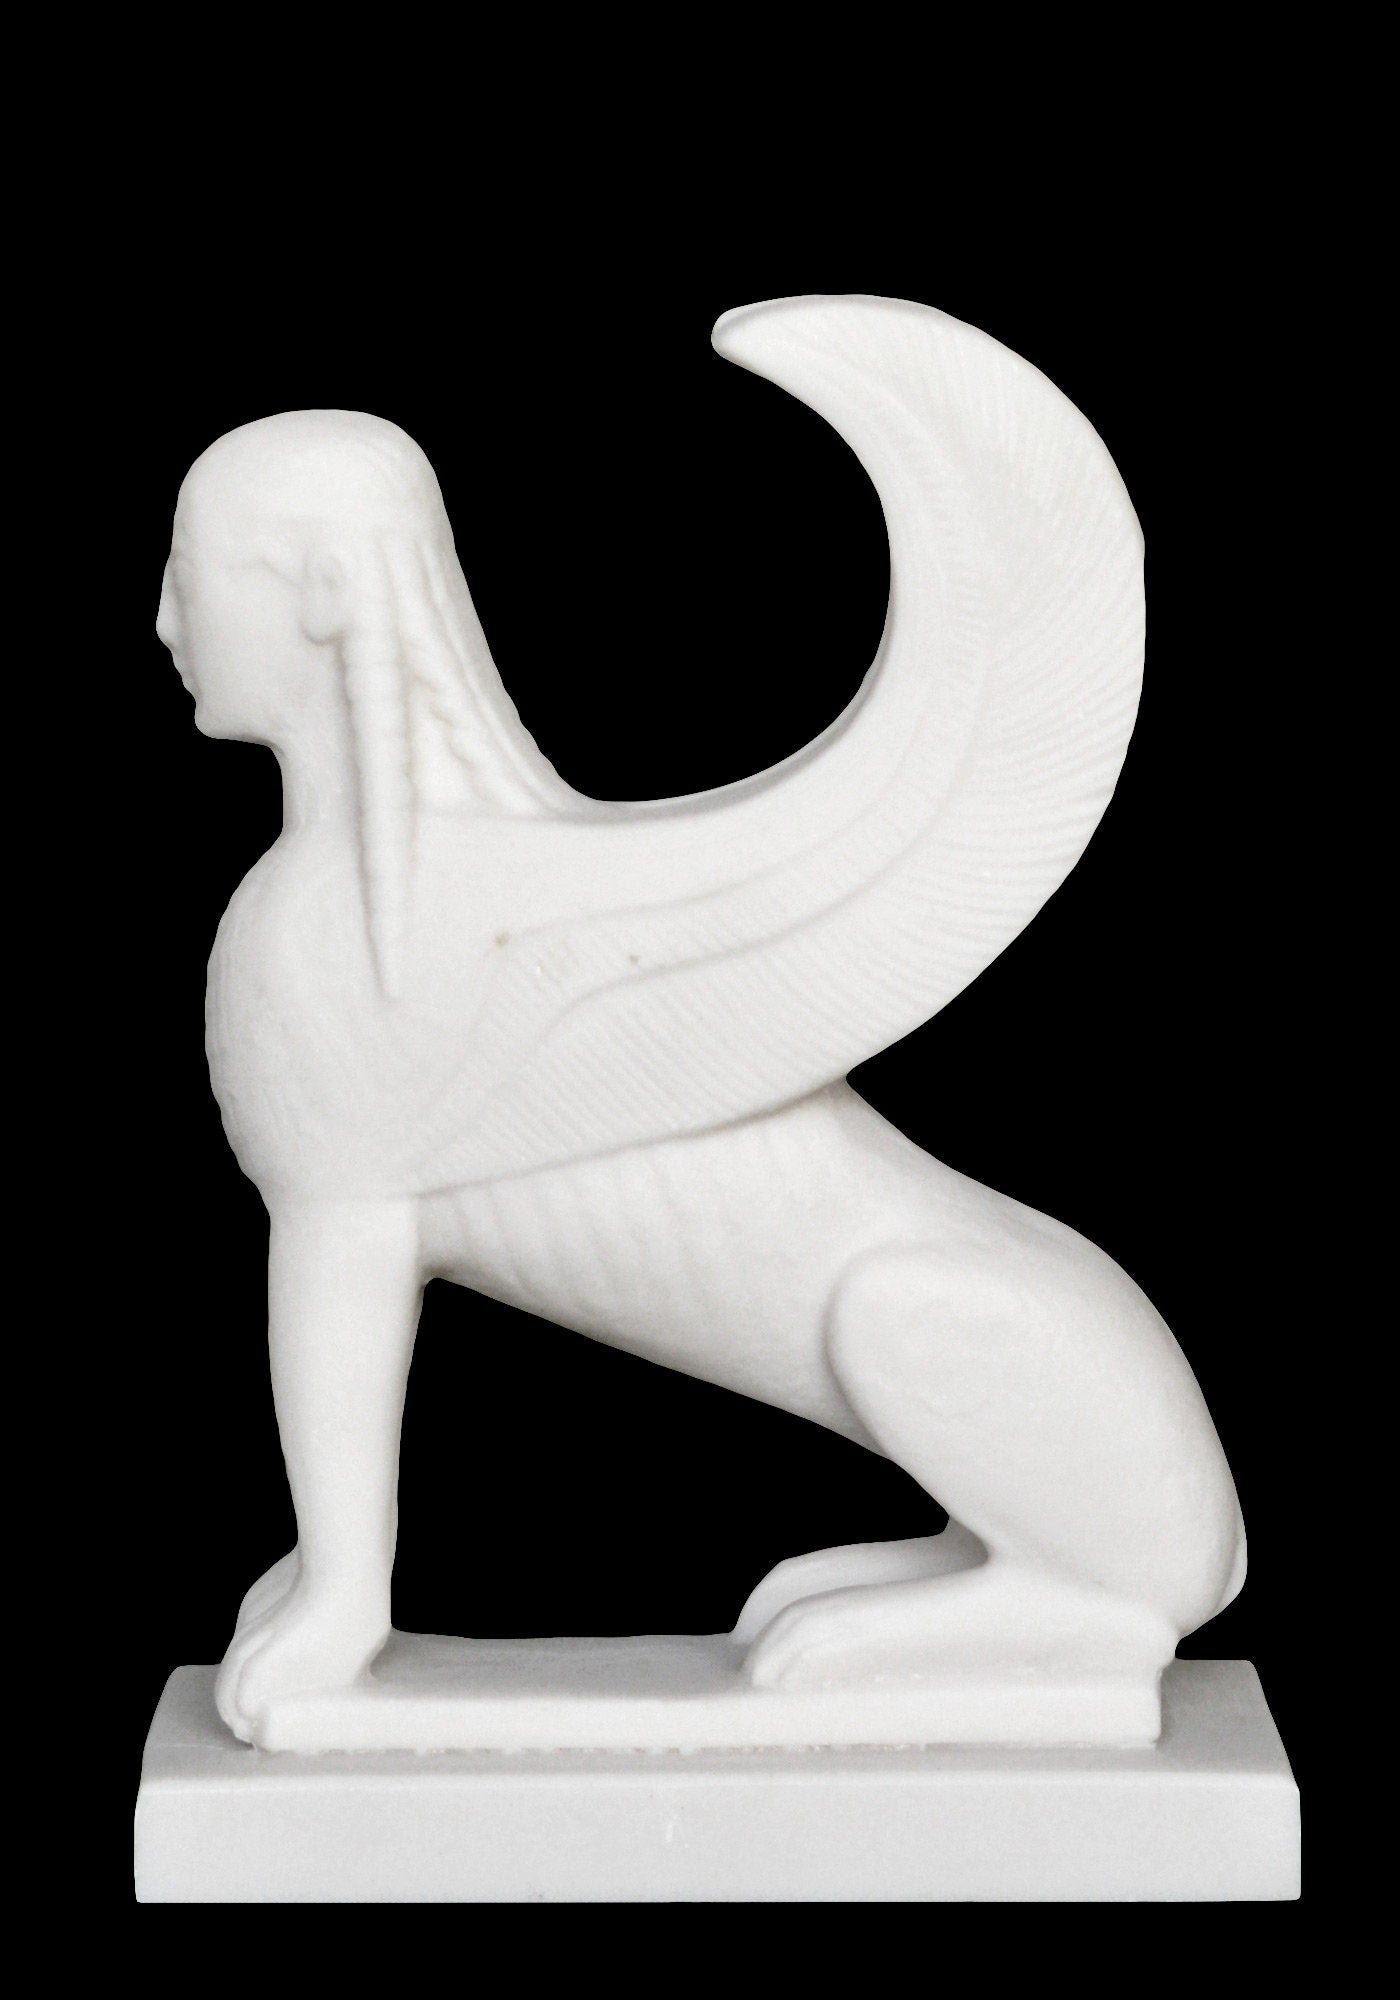 Sphinx - Guardian of Sacred Places, Symbol of Mystery - Composition of the Mortal and the Immortal - Riddle to Oedipus - Alabaster sculpture